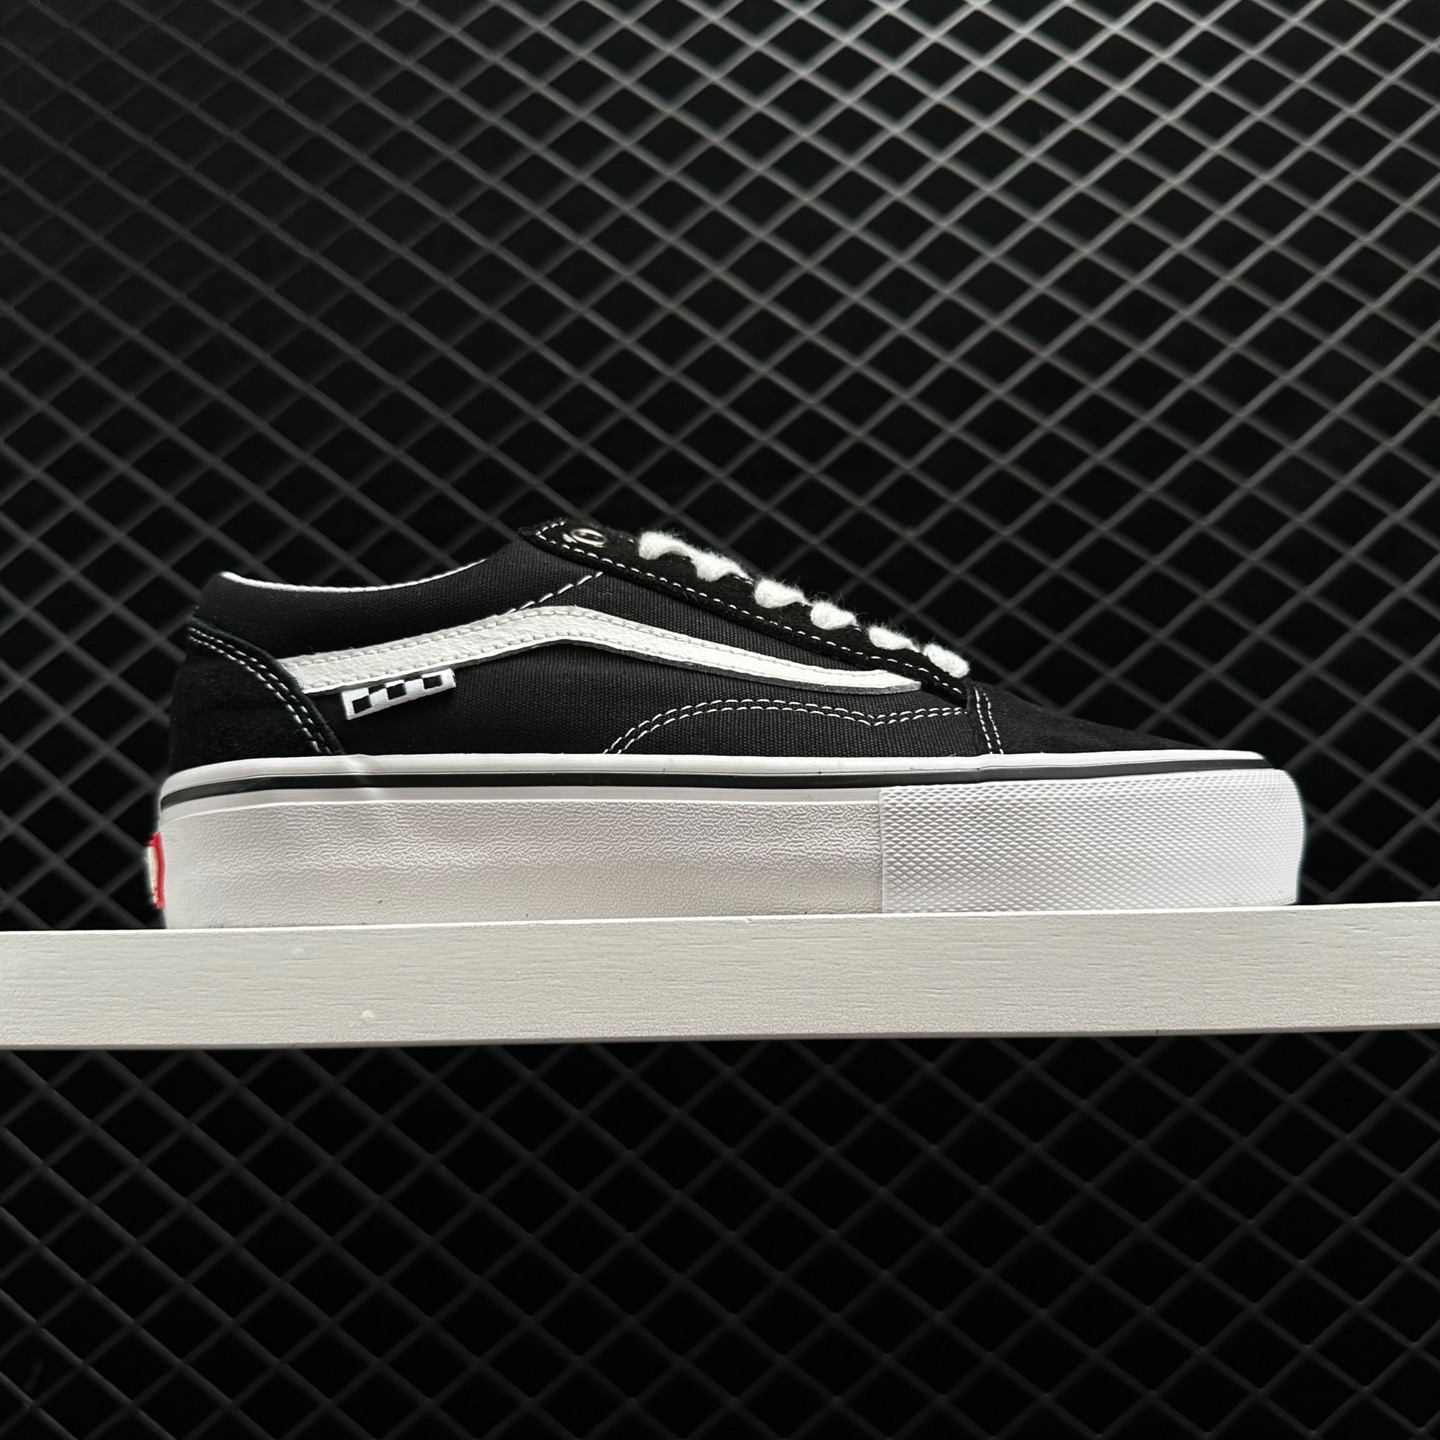 Vans Skate Old Skool 'Checkerboard - Black' VN0A5FCBY28 - Stylish and Classic Skate Shoes